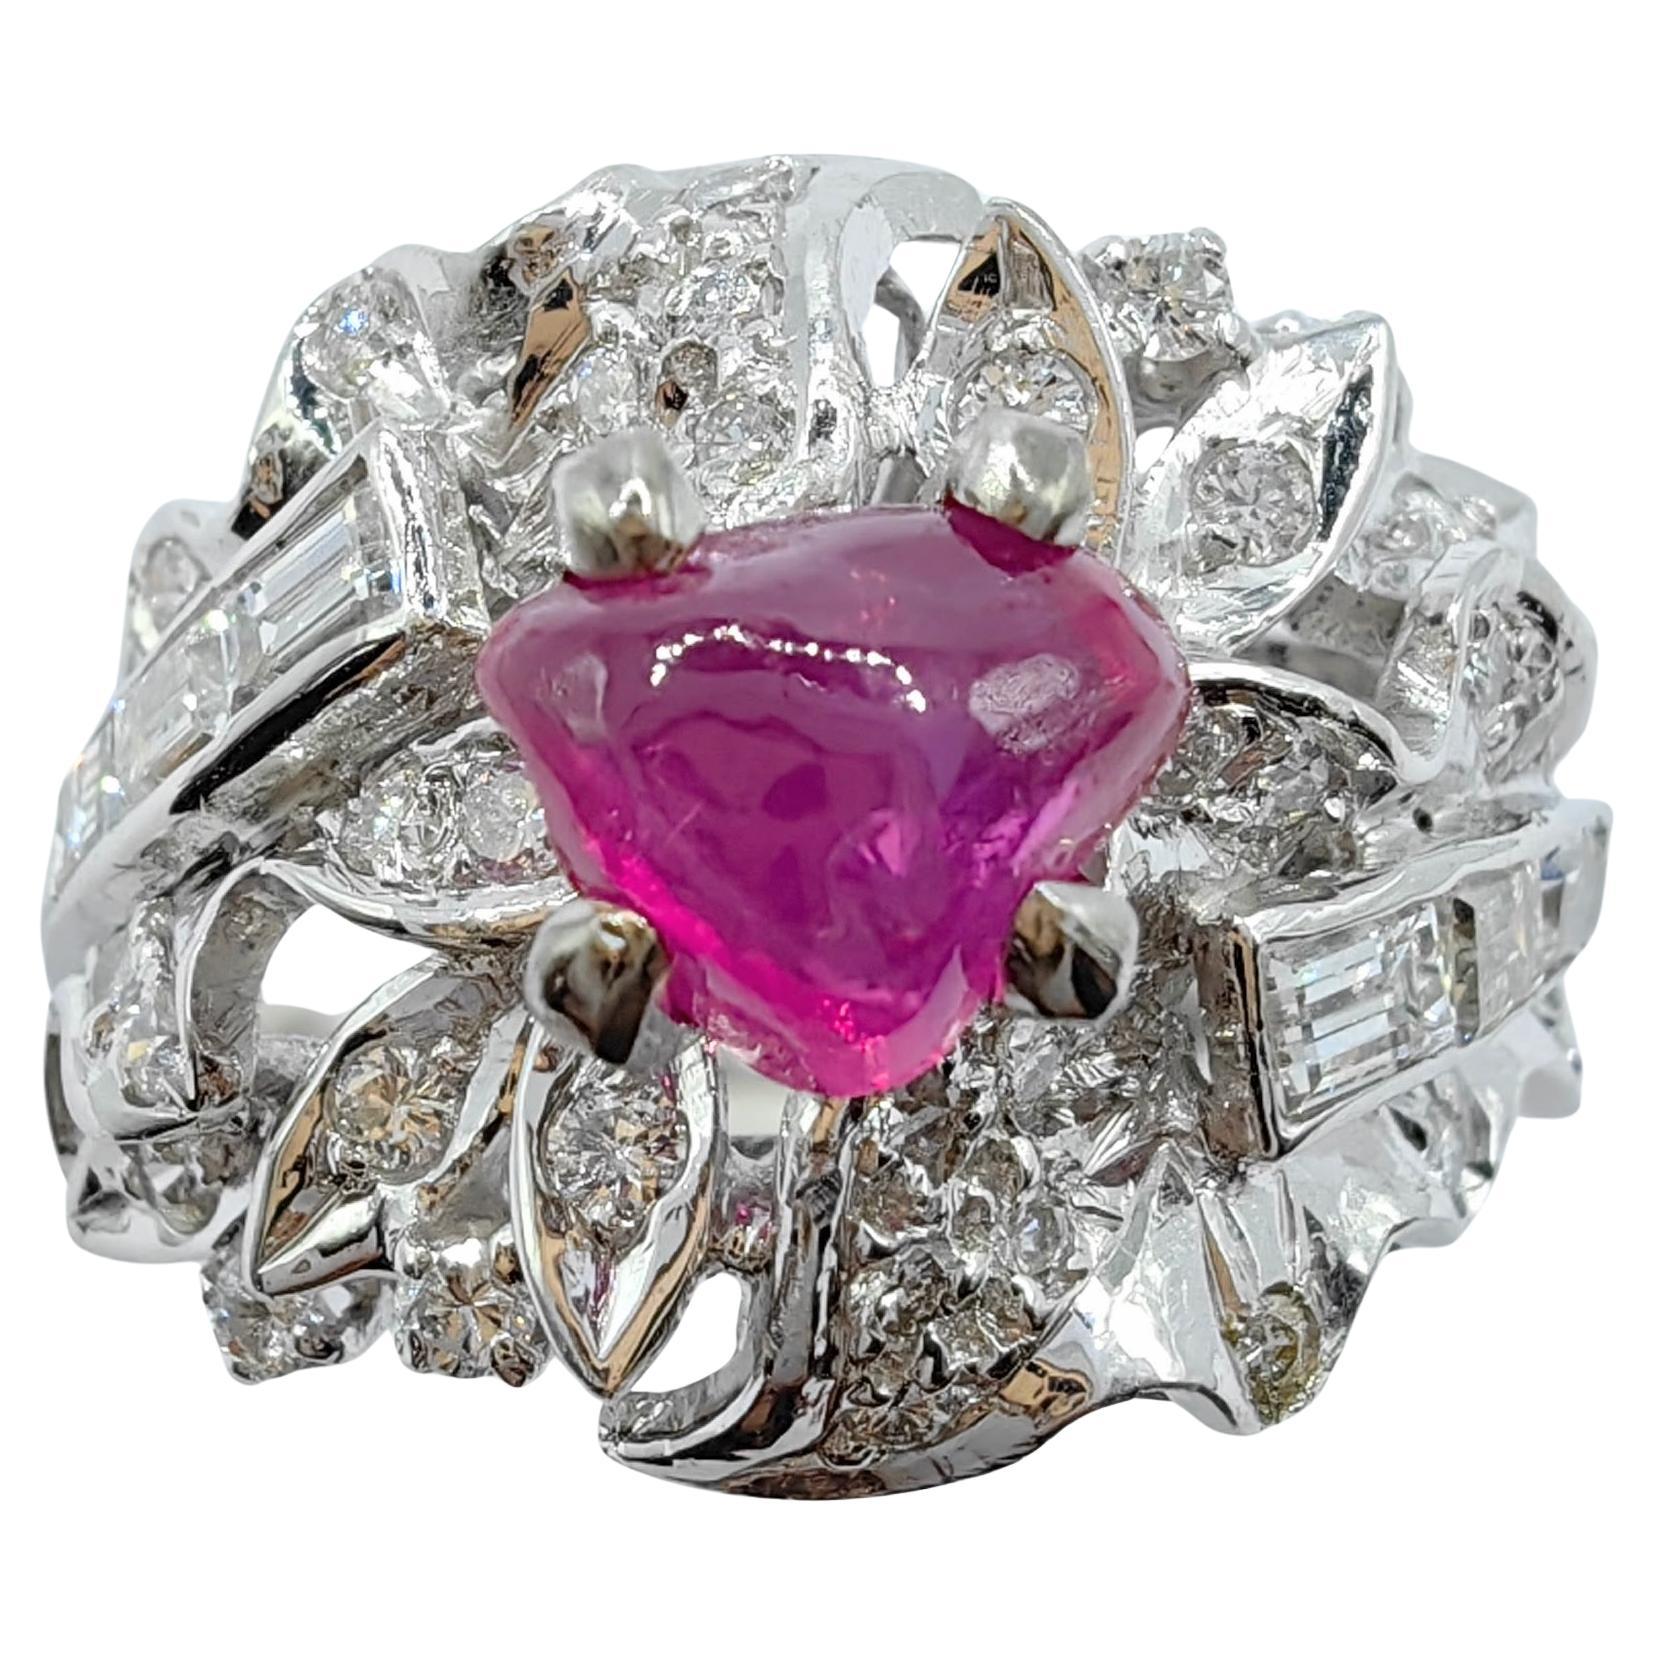 One-of-a-kind Vintage 1.52ct Freeform Ruby Edwardian Diamond Ring in Platinum For Sale